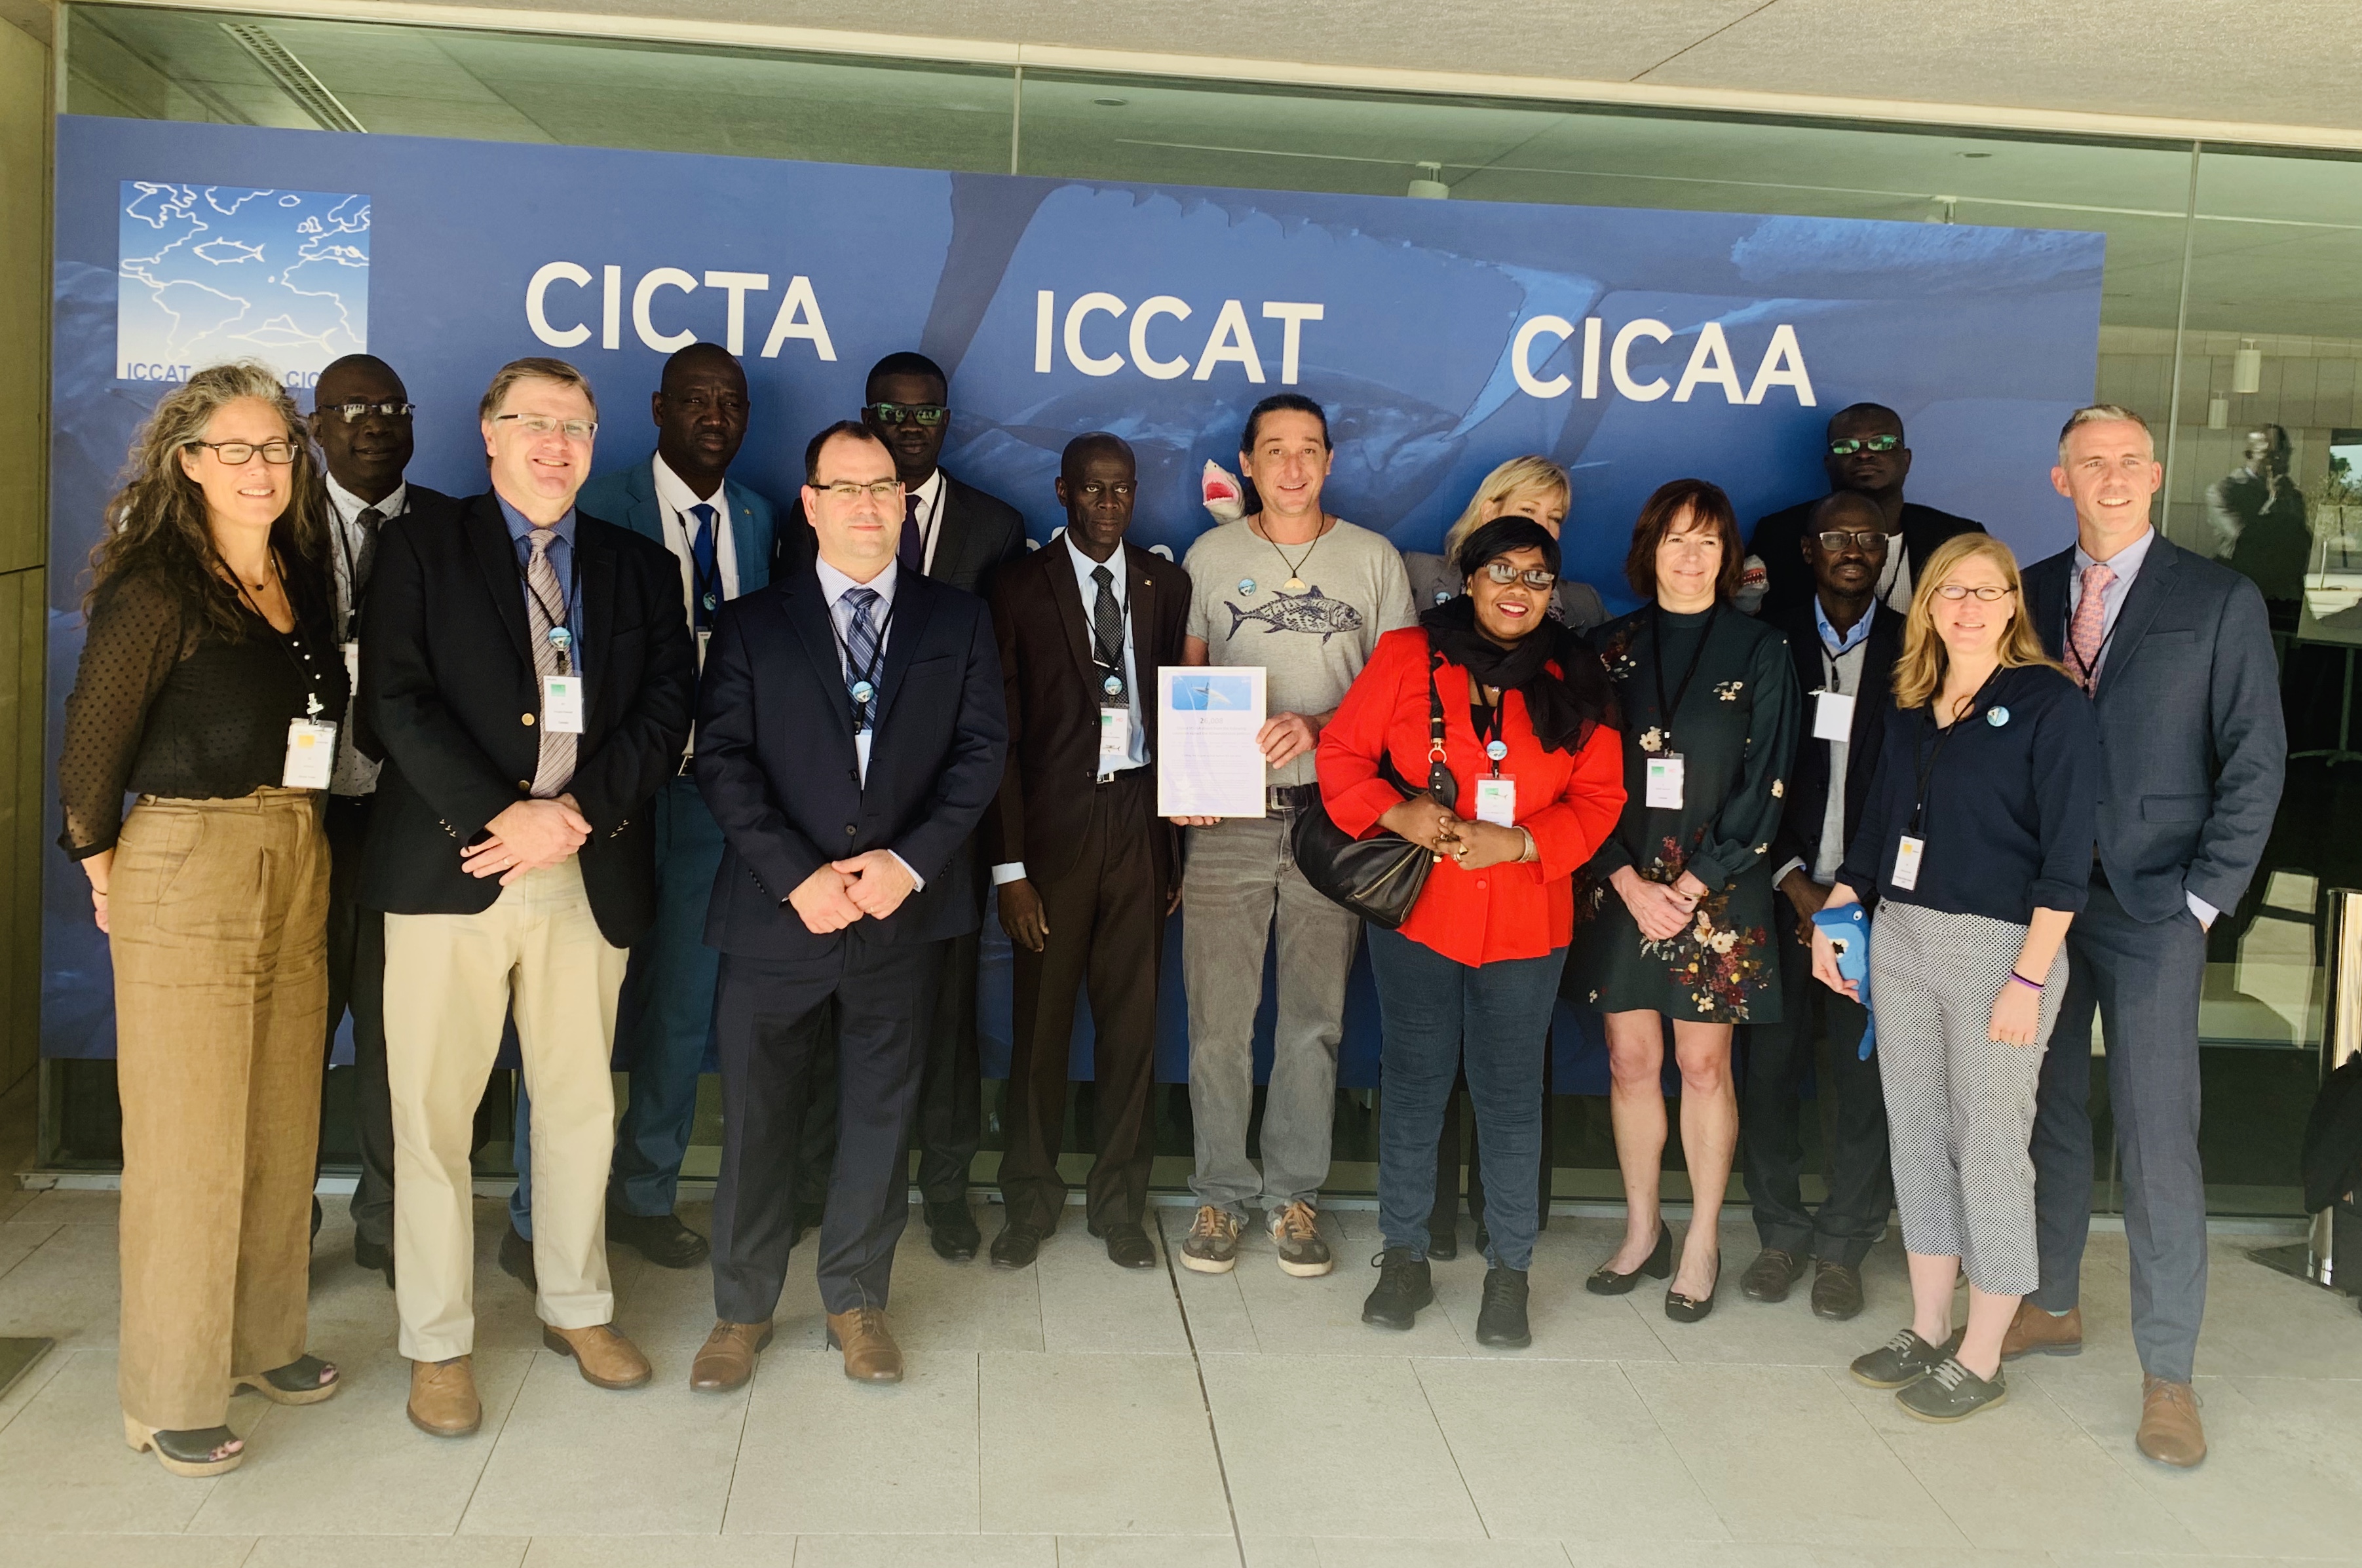 A group of fifteen people stand in front of an ICCAT banner